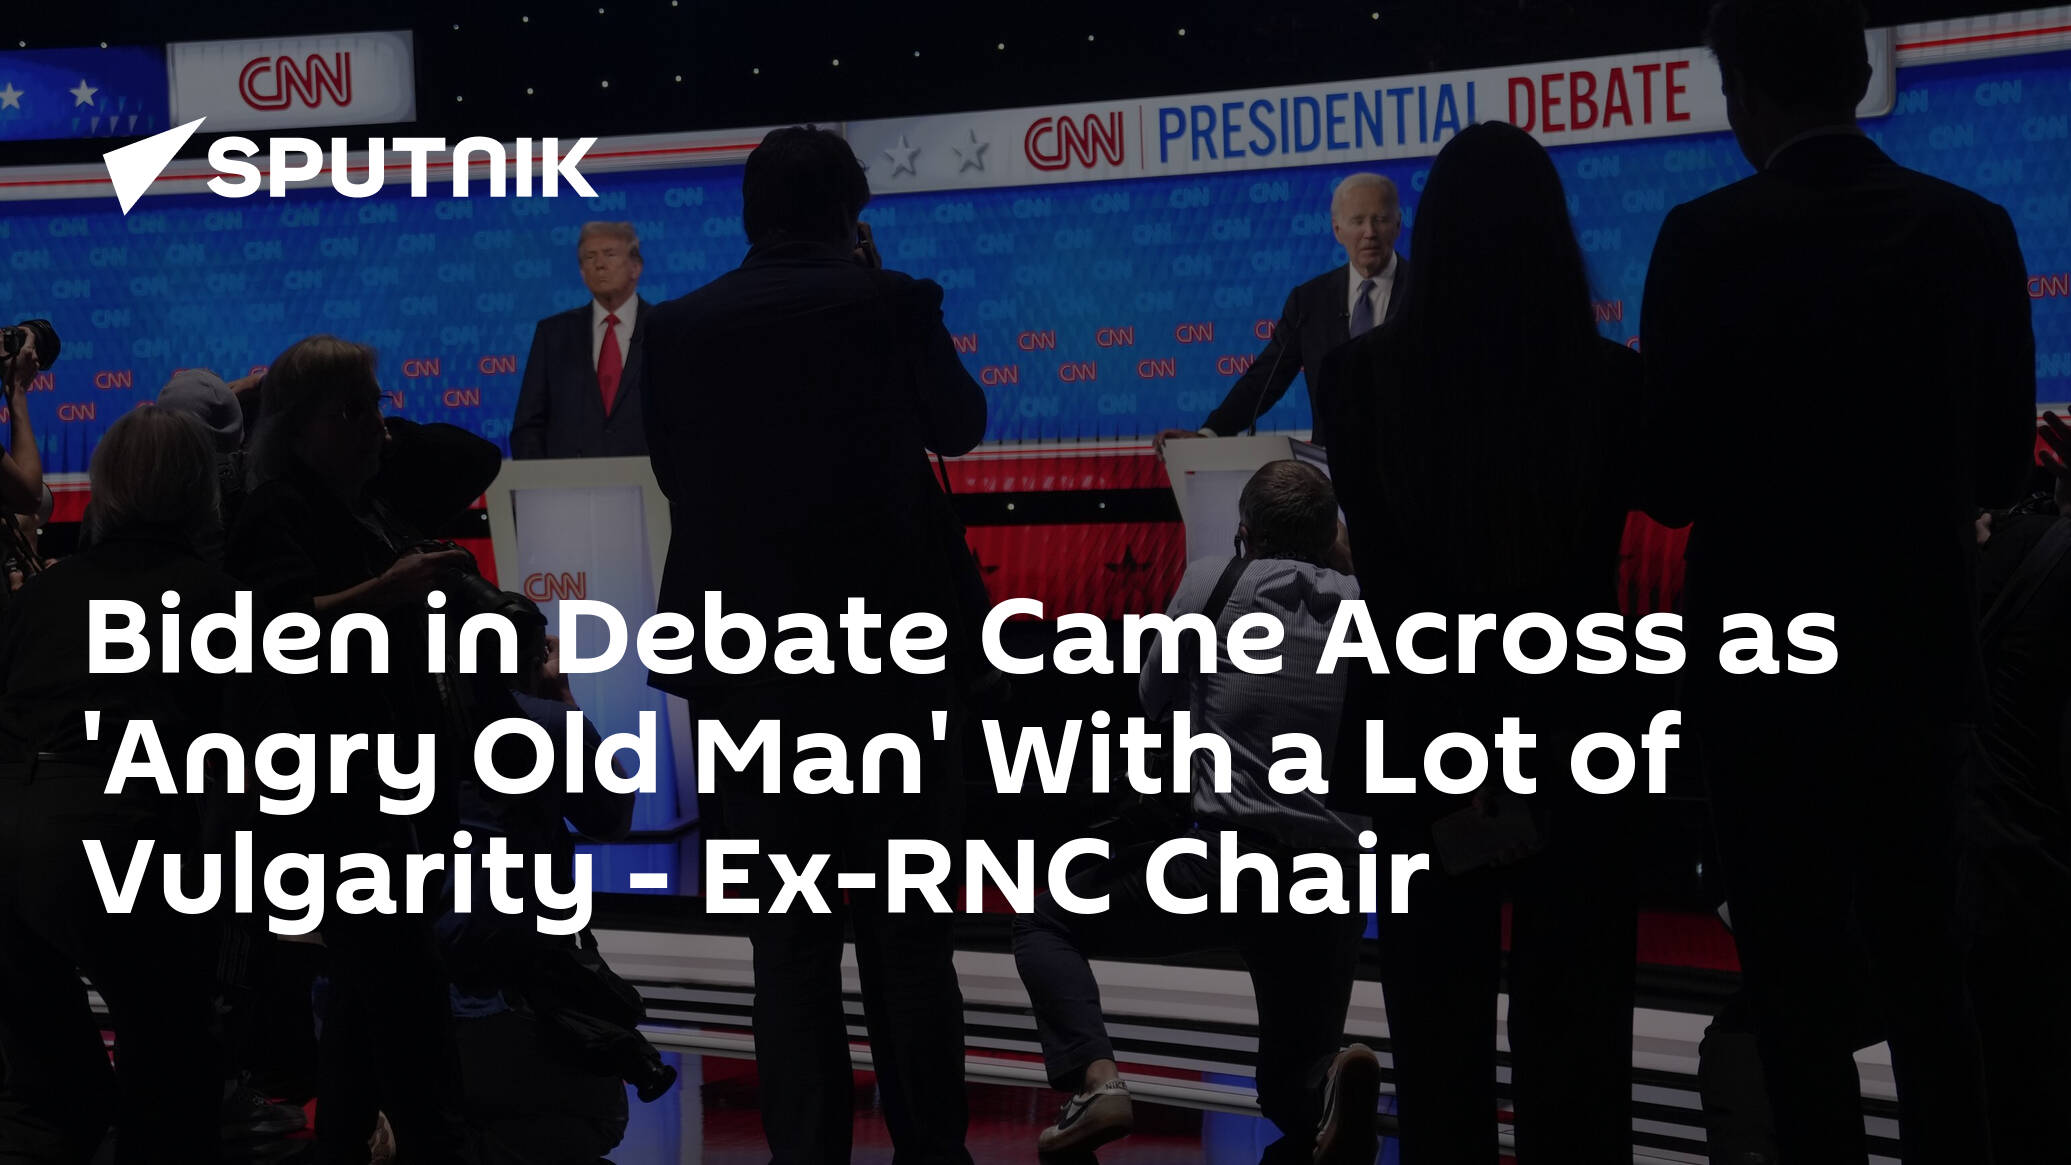 Biden in Debate Came Across as 'Angry Old Man' With a Lot of Vulgarity – Ex-RNC Chair